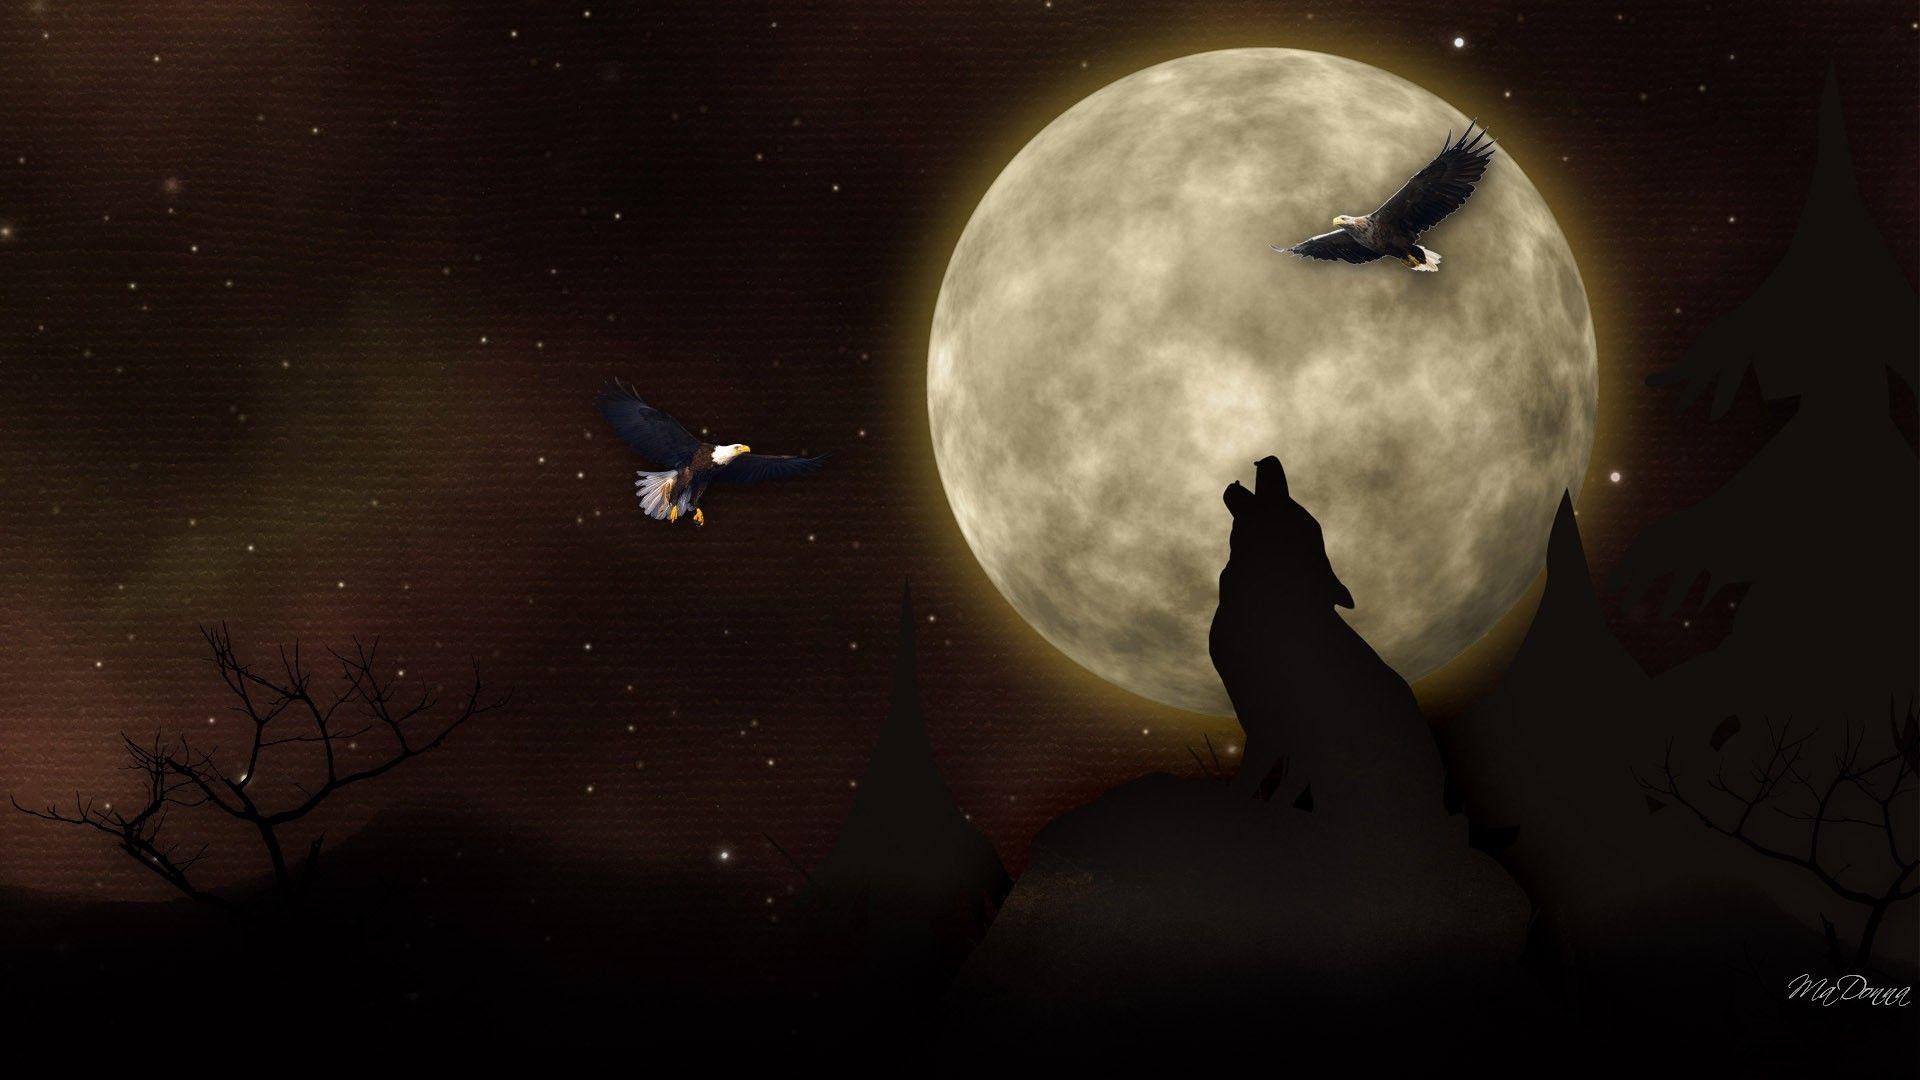 Eagles and Wolves Wallpaper Free Eagles and Wolves